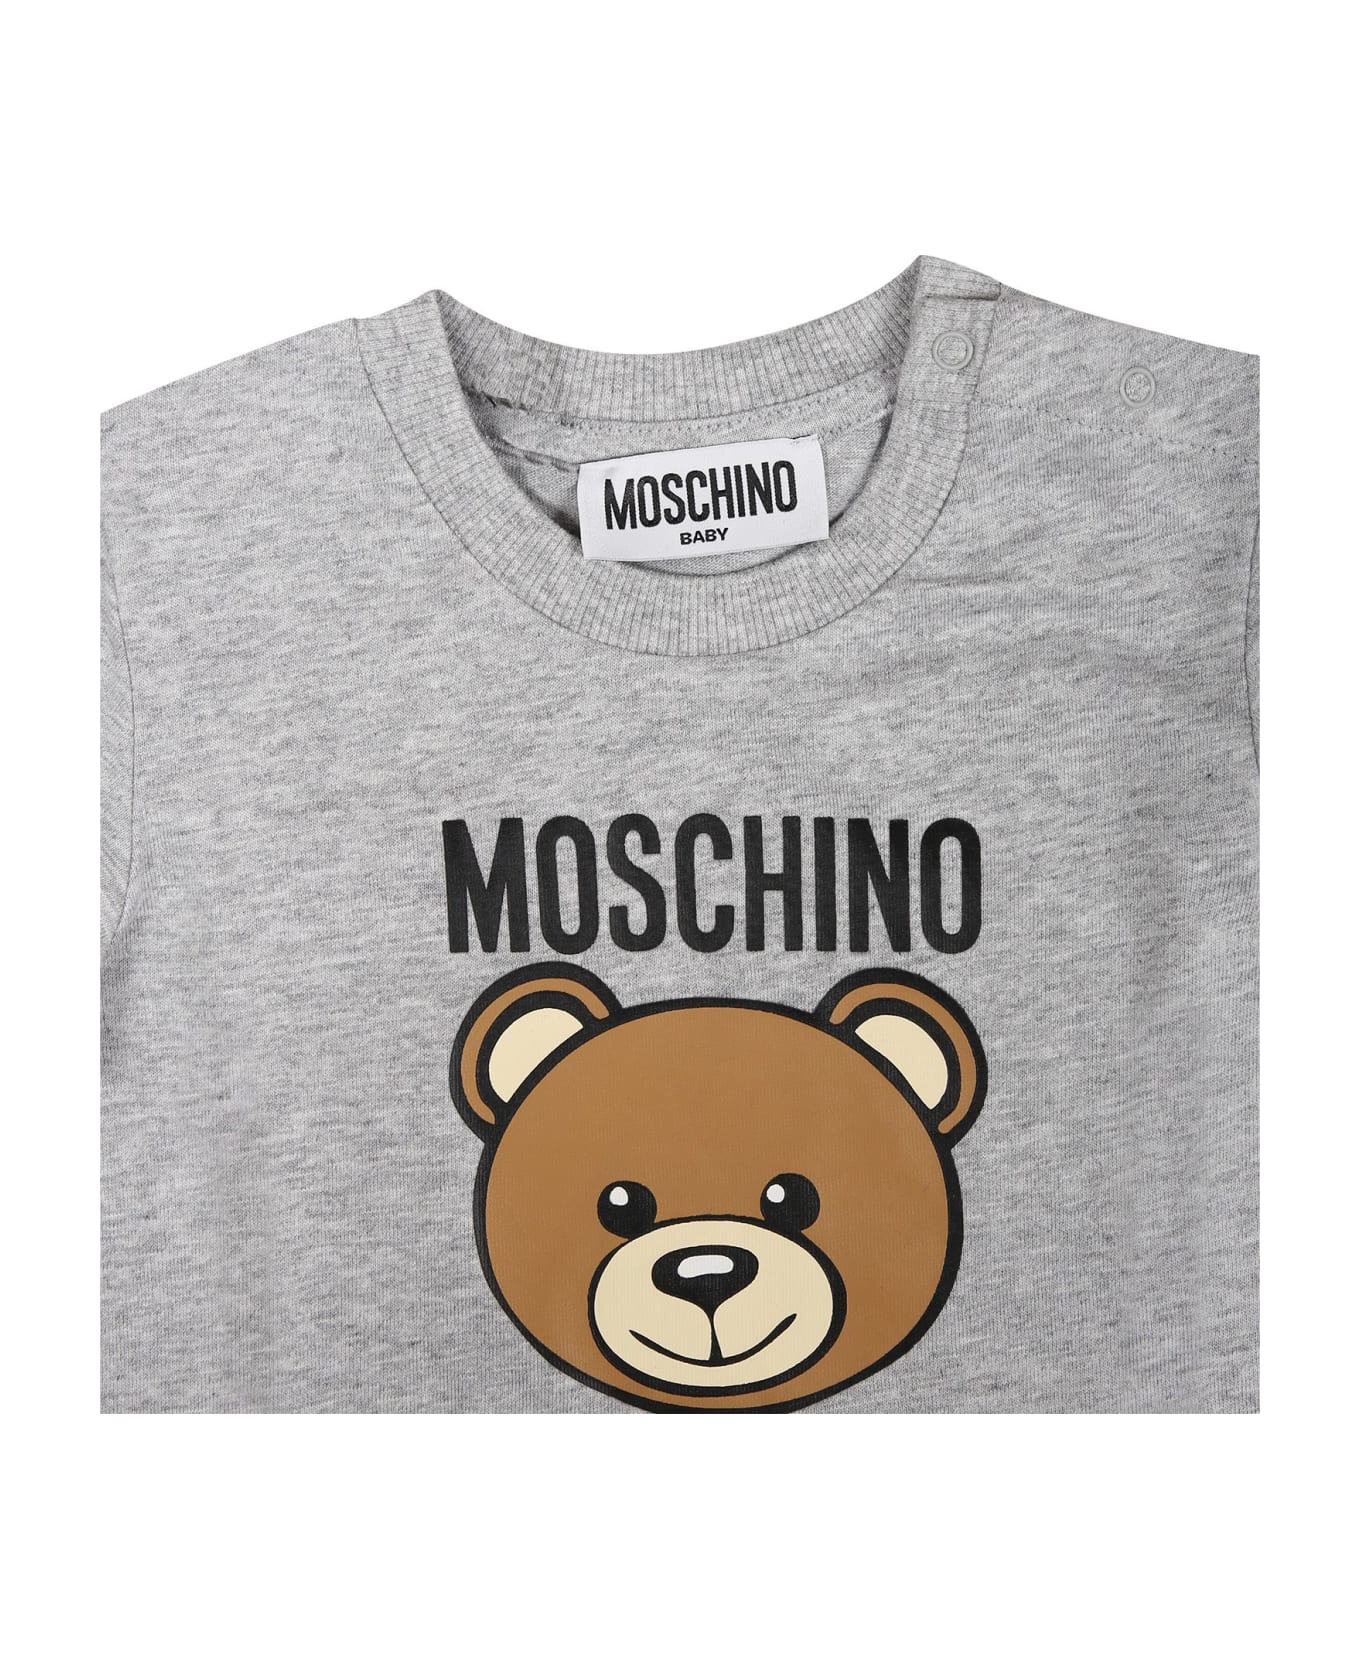 Moschino Multicolor Set For Baby Boy With Teddy Bear And Logo - Multicolor